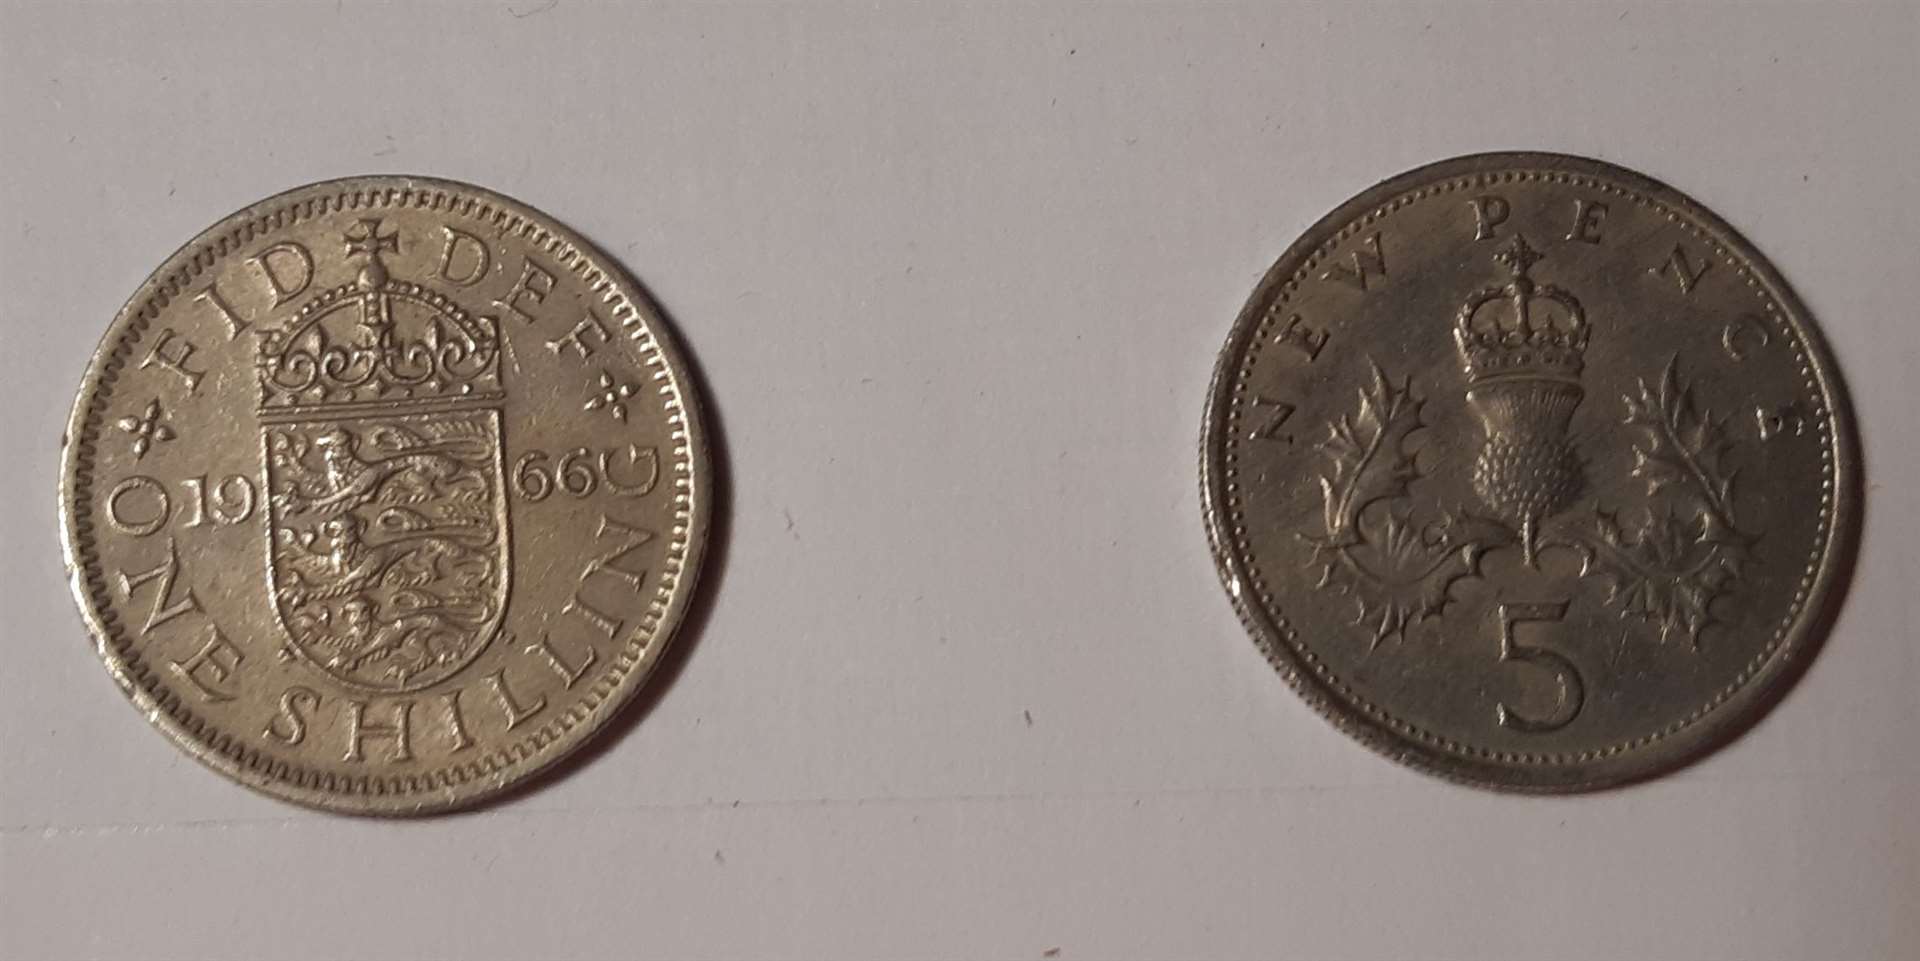 A 1966 shilling and its 1968 replacement